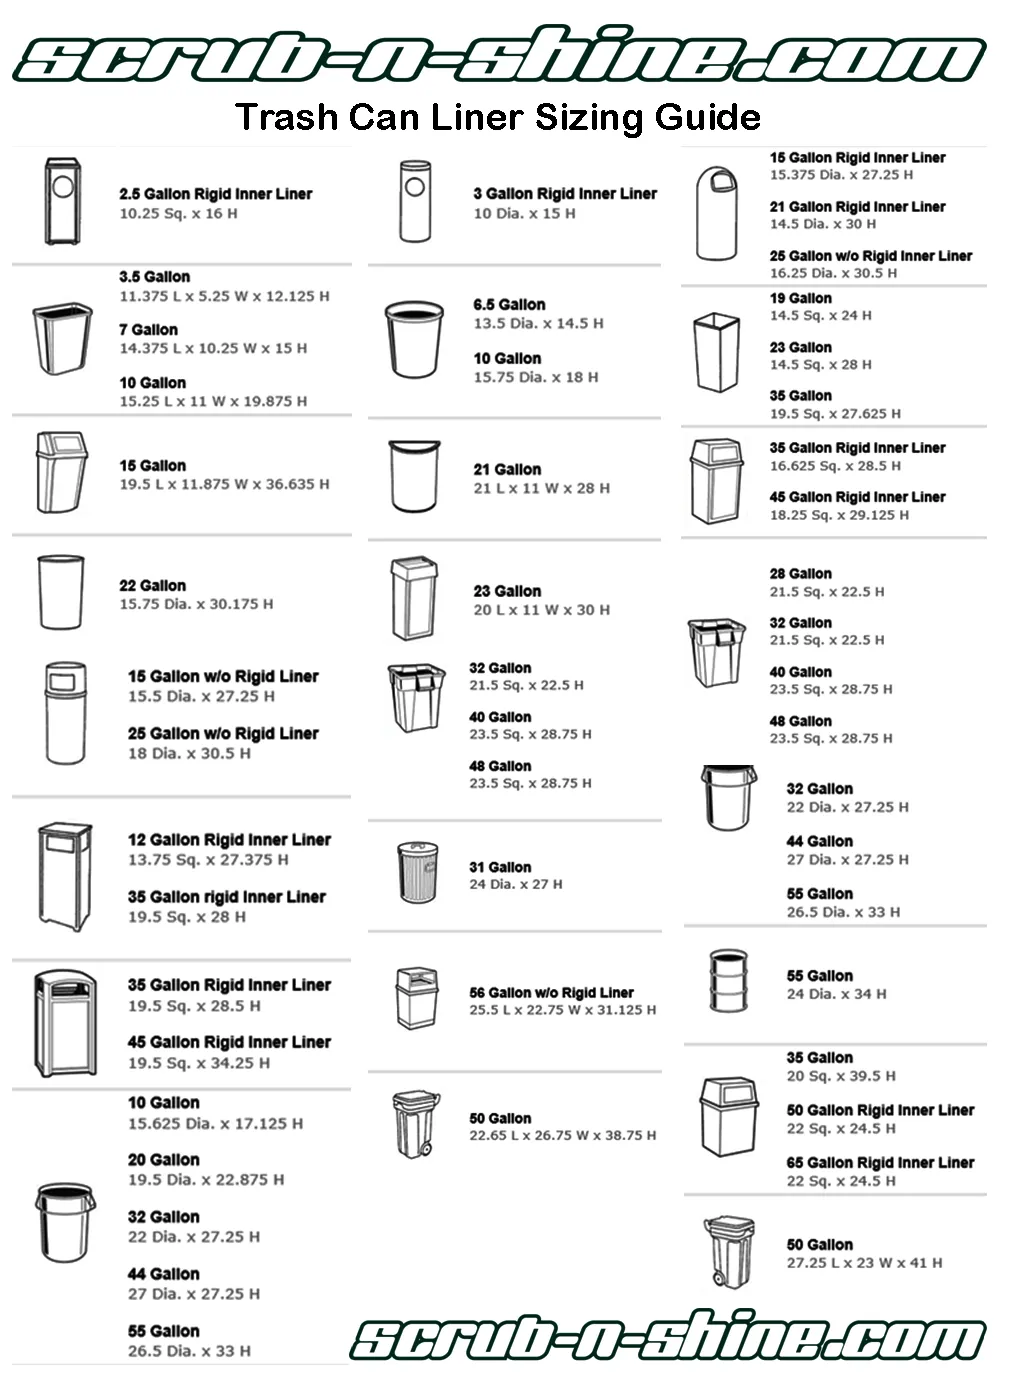 Trash-Can-Liner-Sizing-Guide.png